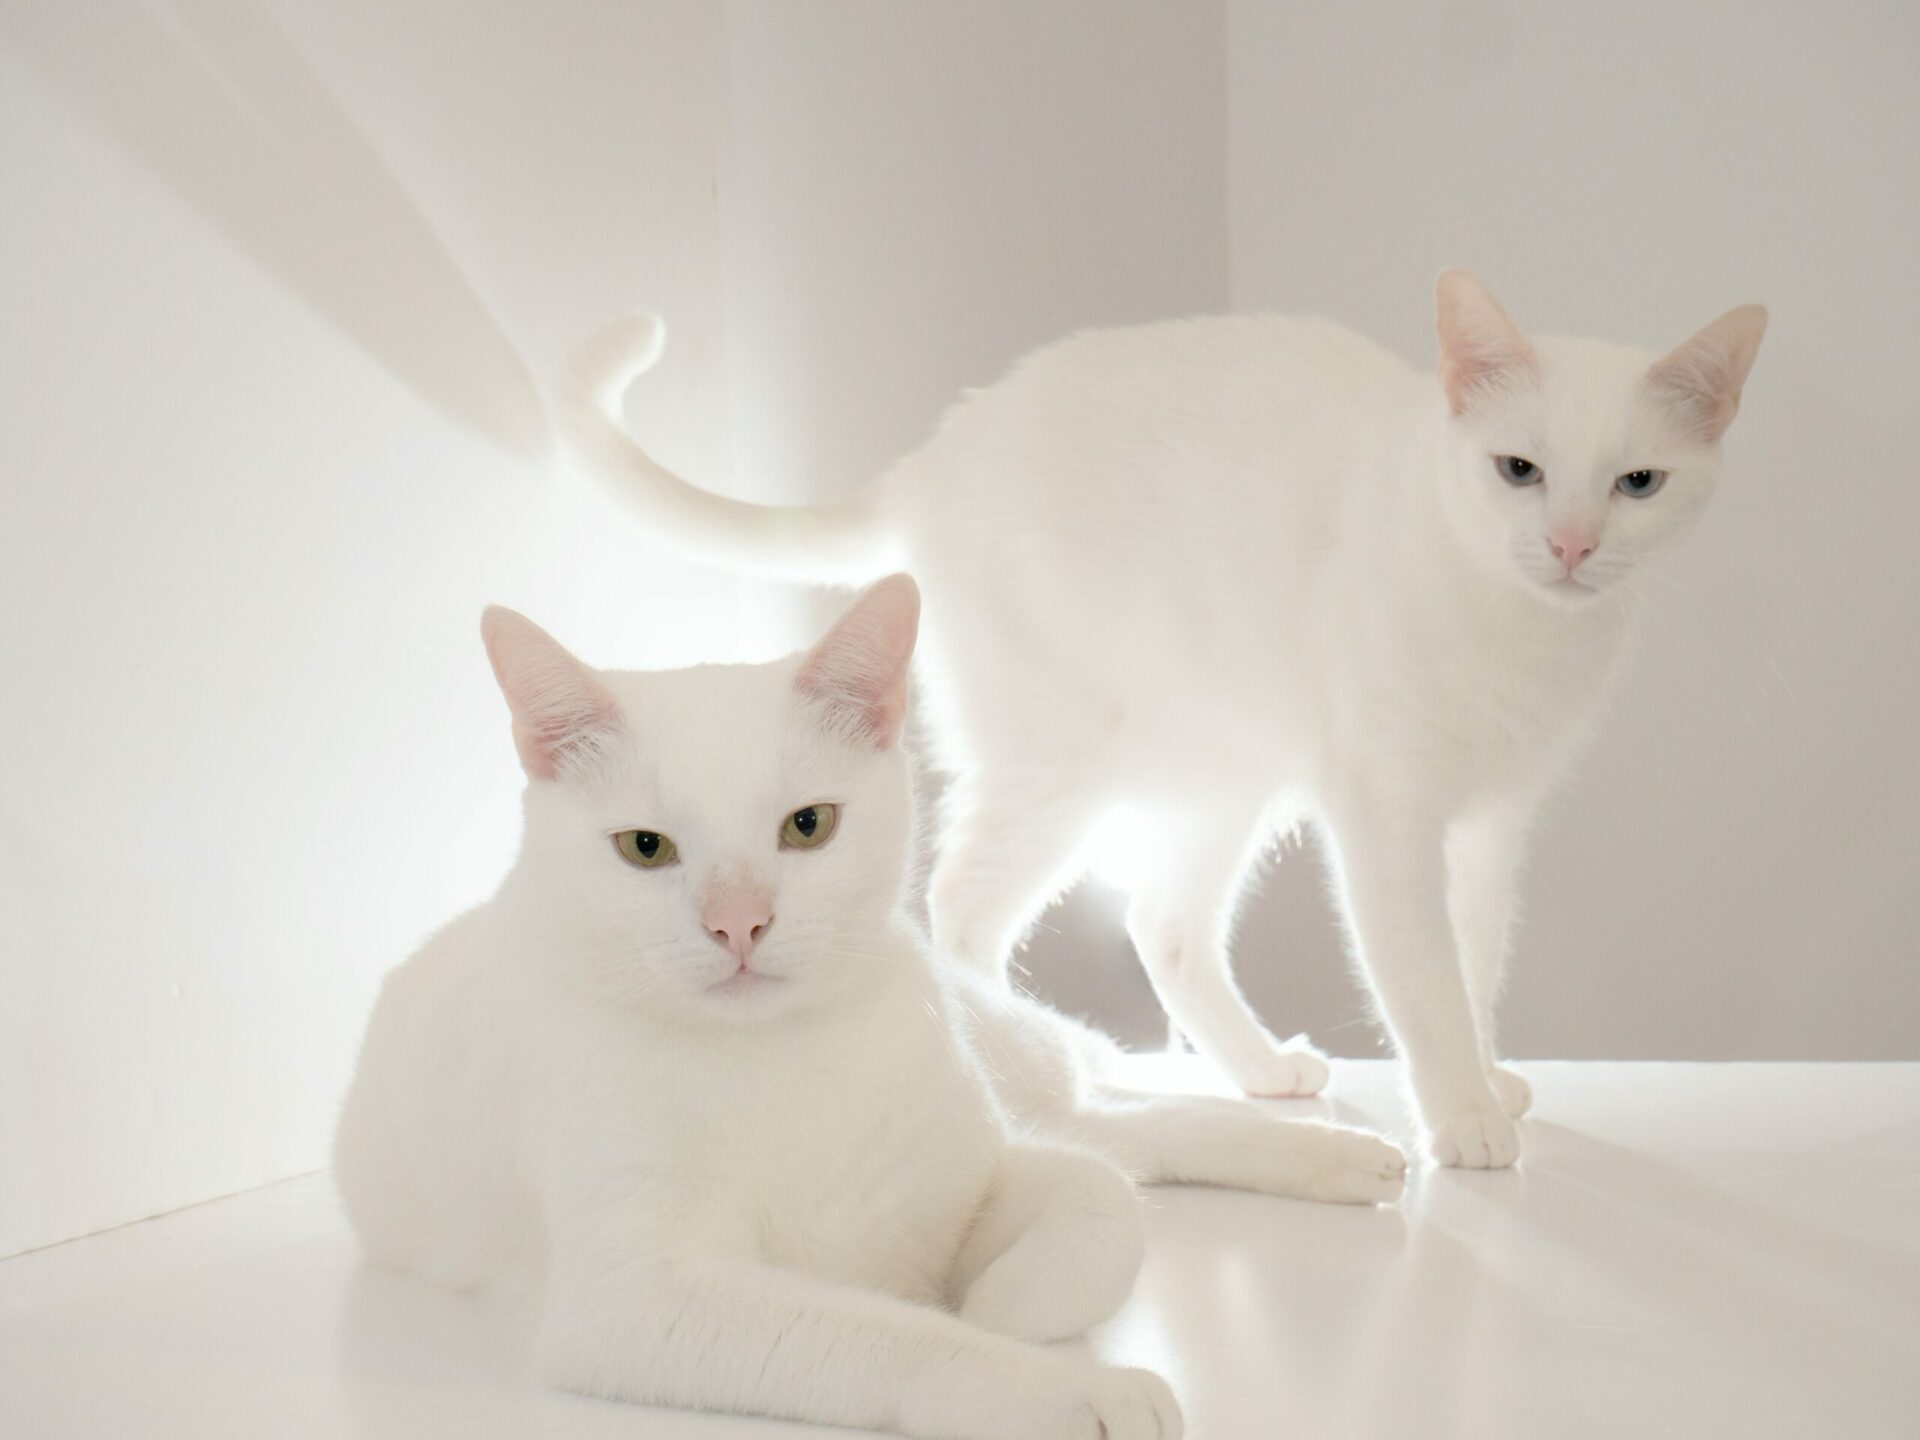 Two white cats against a white wall.